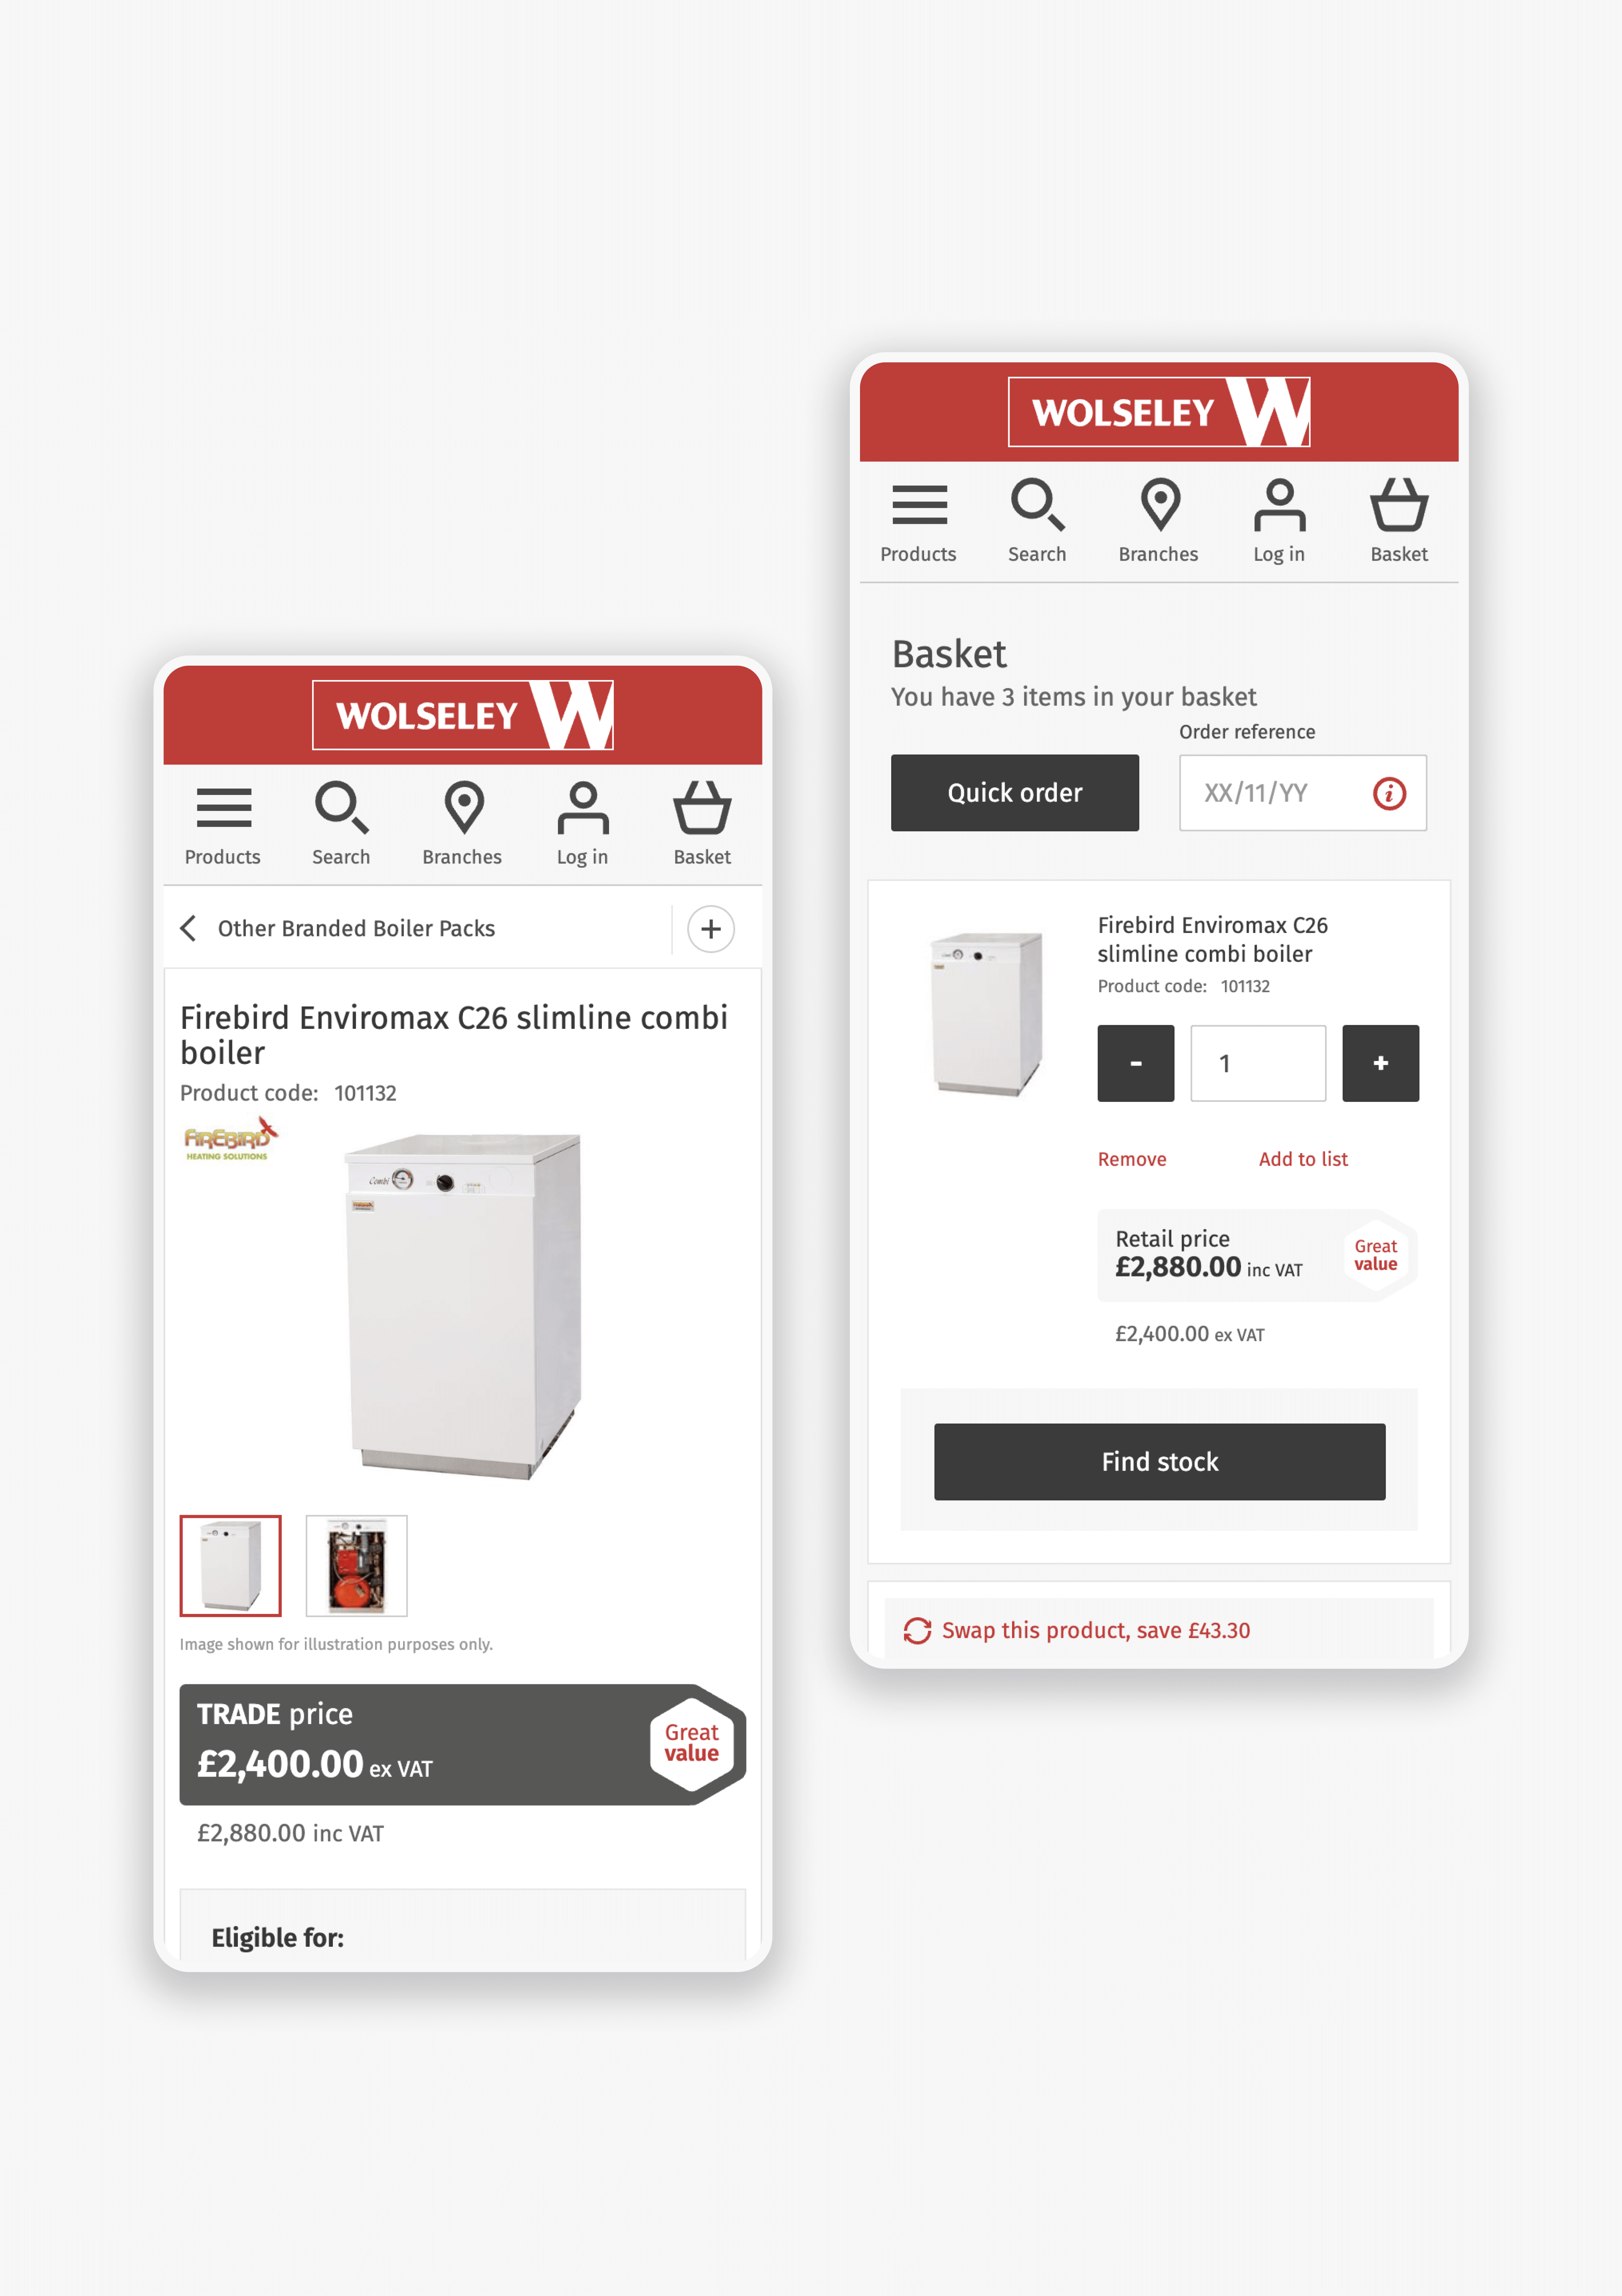 Mobile product display page (PDP) and basket page side-by-side